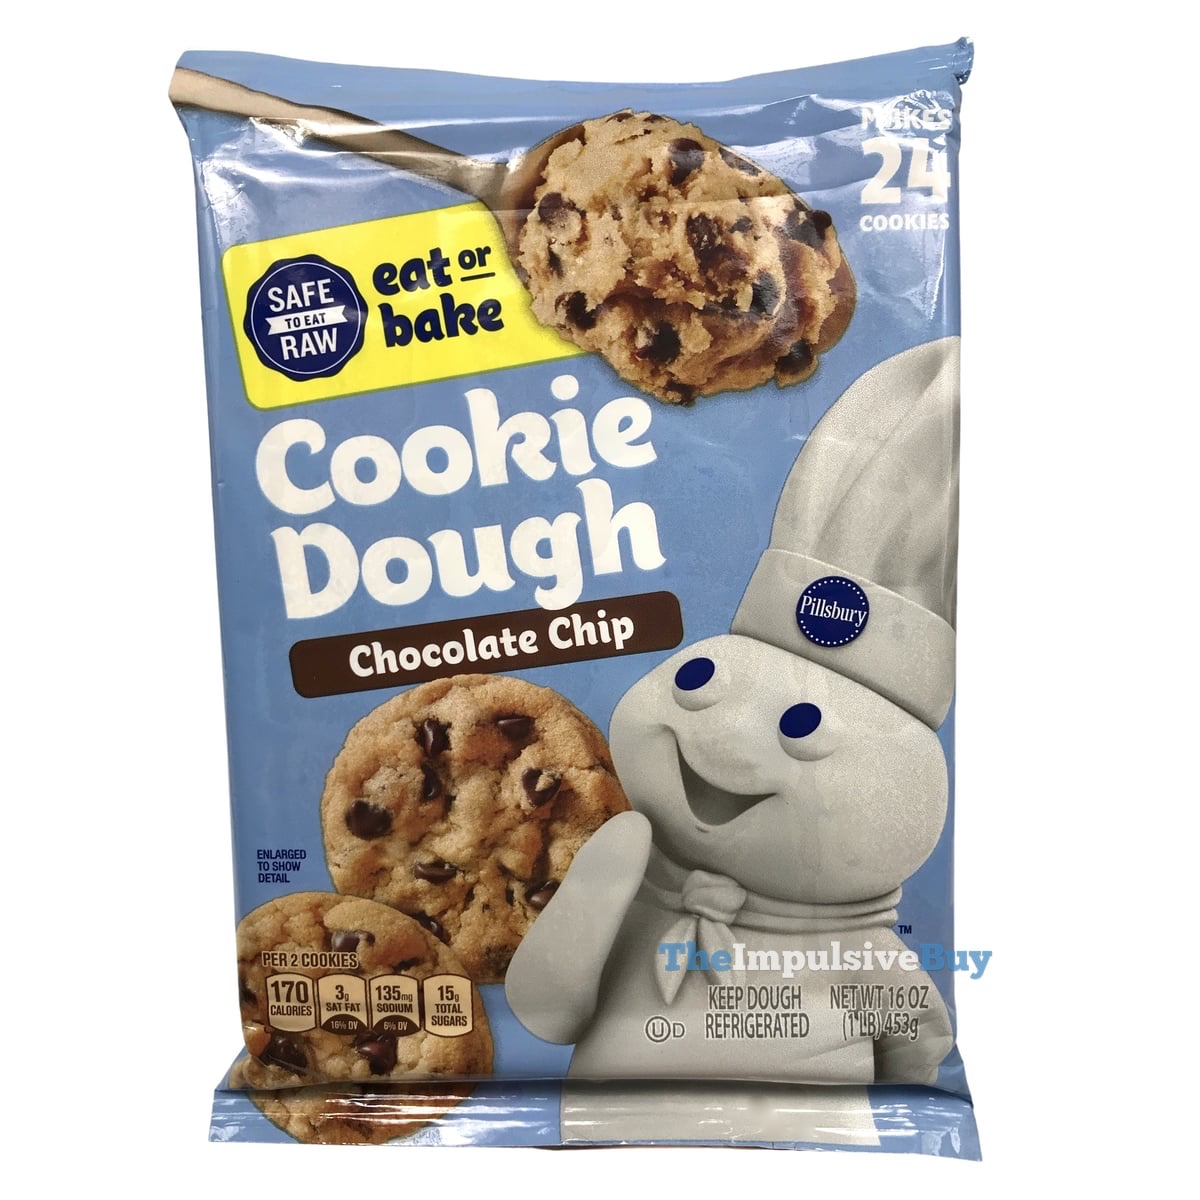 REVIEW: Pillsbury Safe To Eat Raw Cookie Dough - The Impulsive Buy